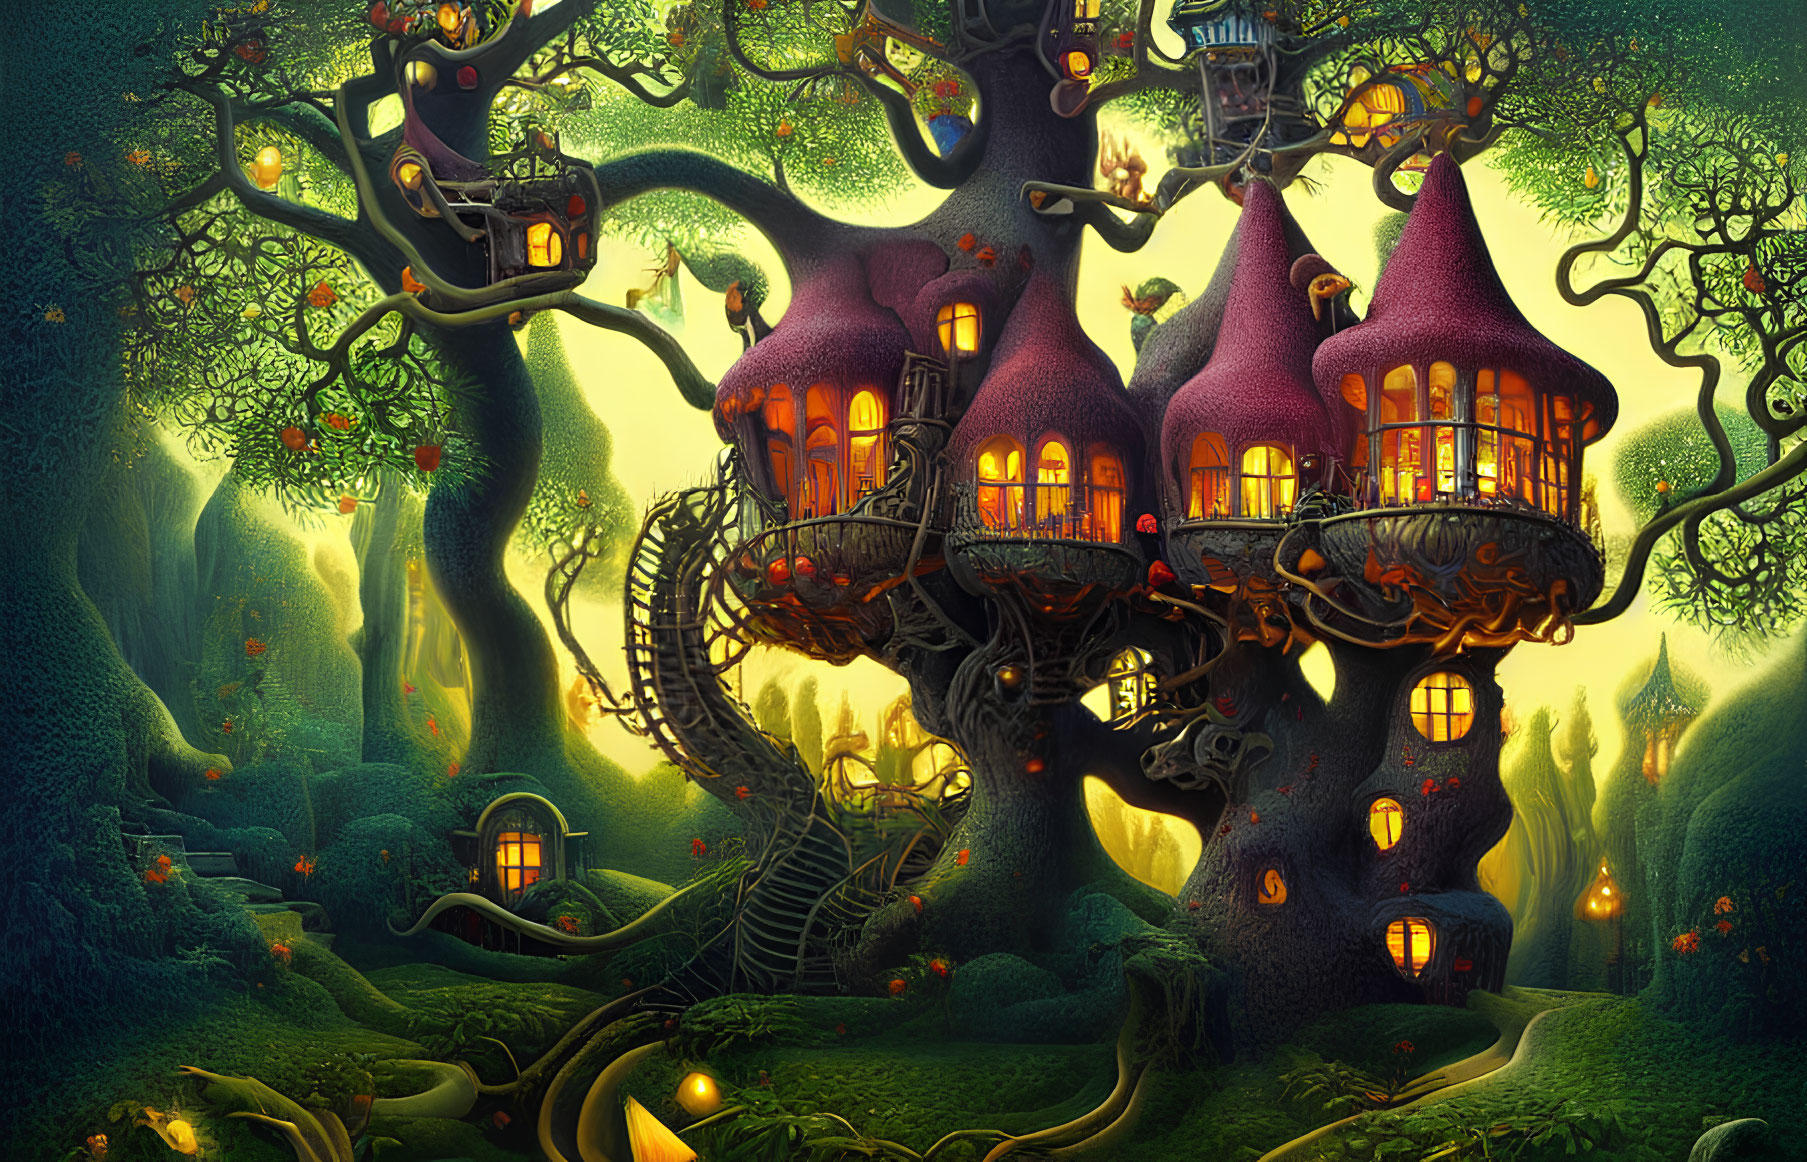 Enchanted forest with fantasy tree houses and glowing windows